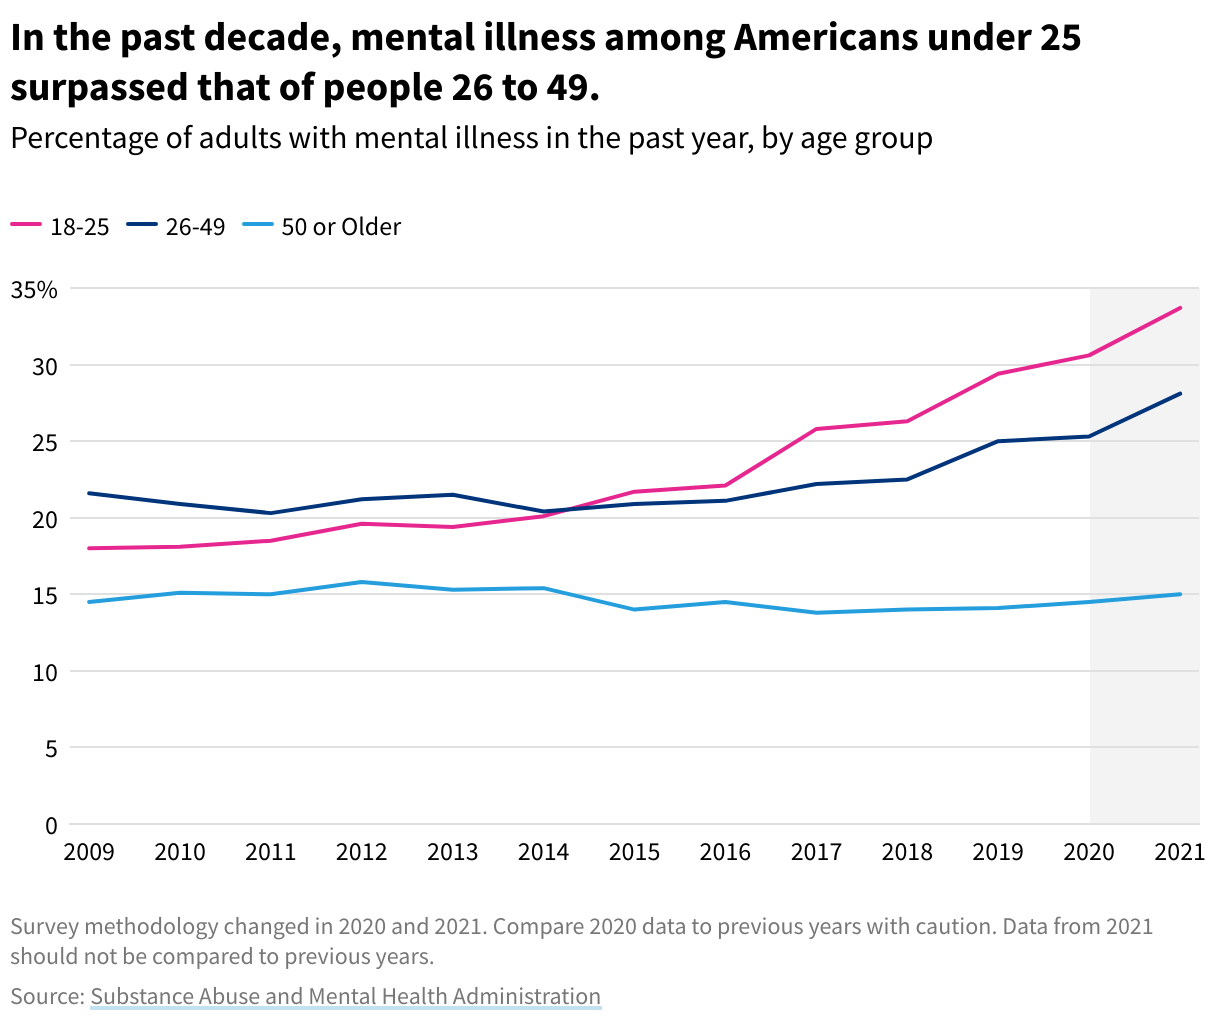 line chart showing mental illness rates for three age groups: 18-25, 26-49, and 50 or older. In 2009, 26-49 had highest rates, but they were overtaken by 18-25 year olds in 2015. 